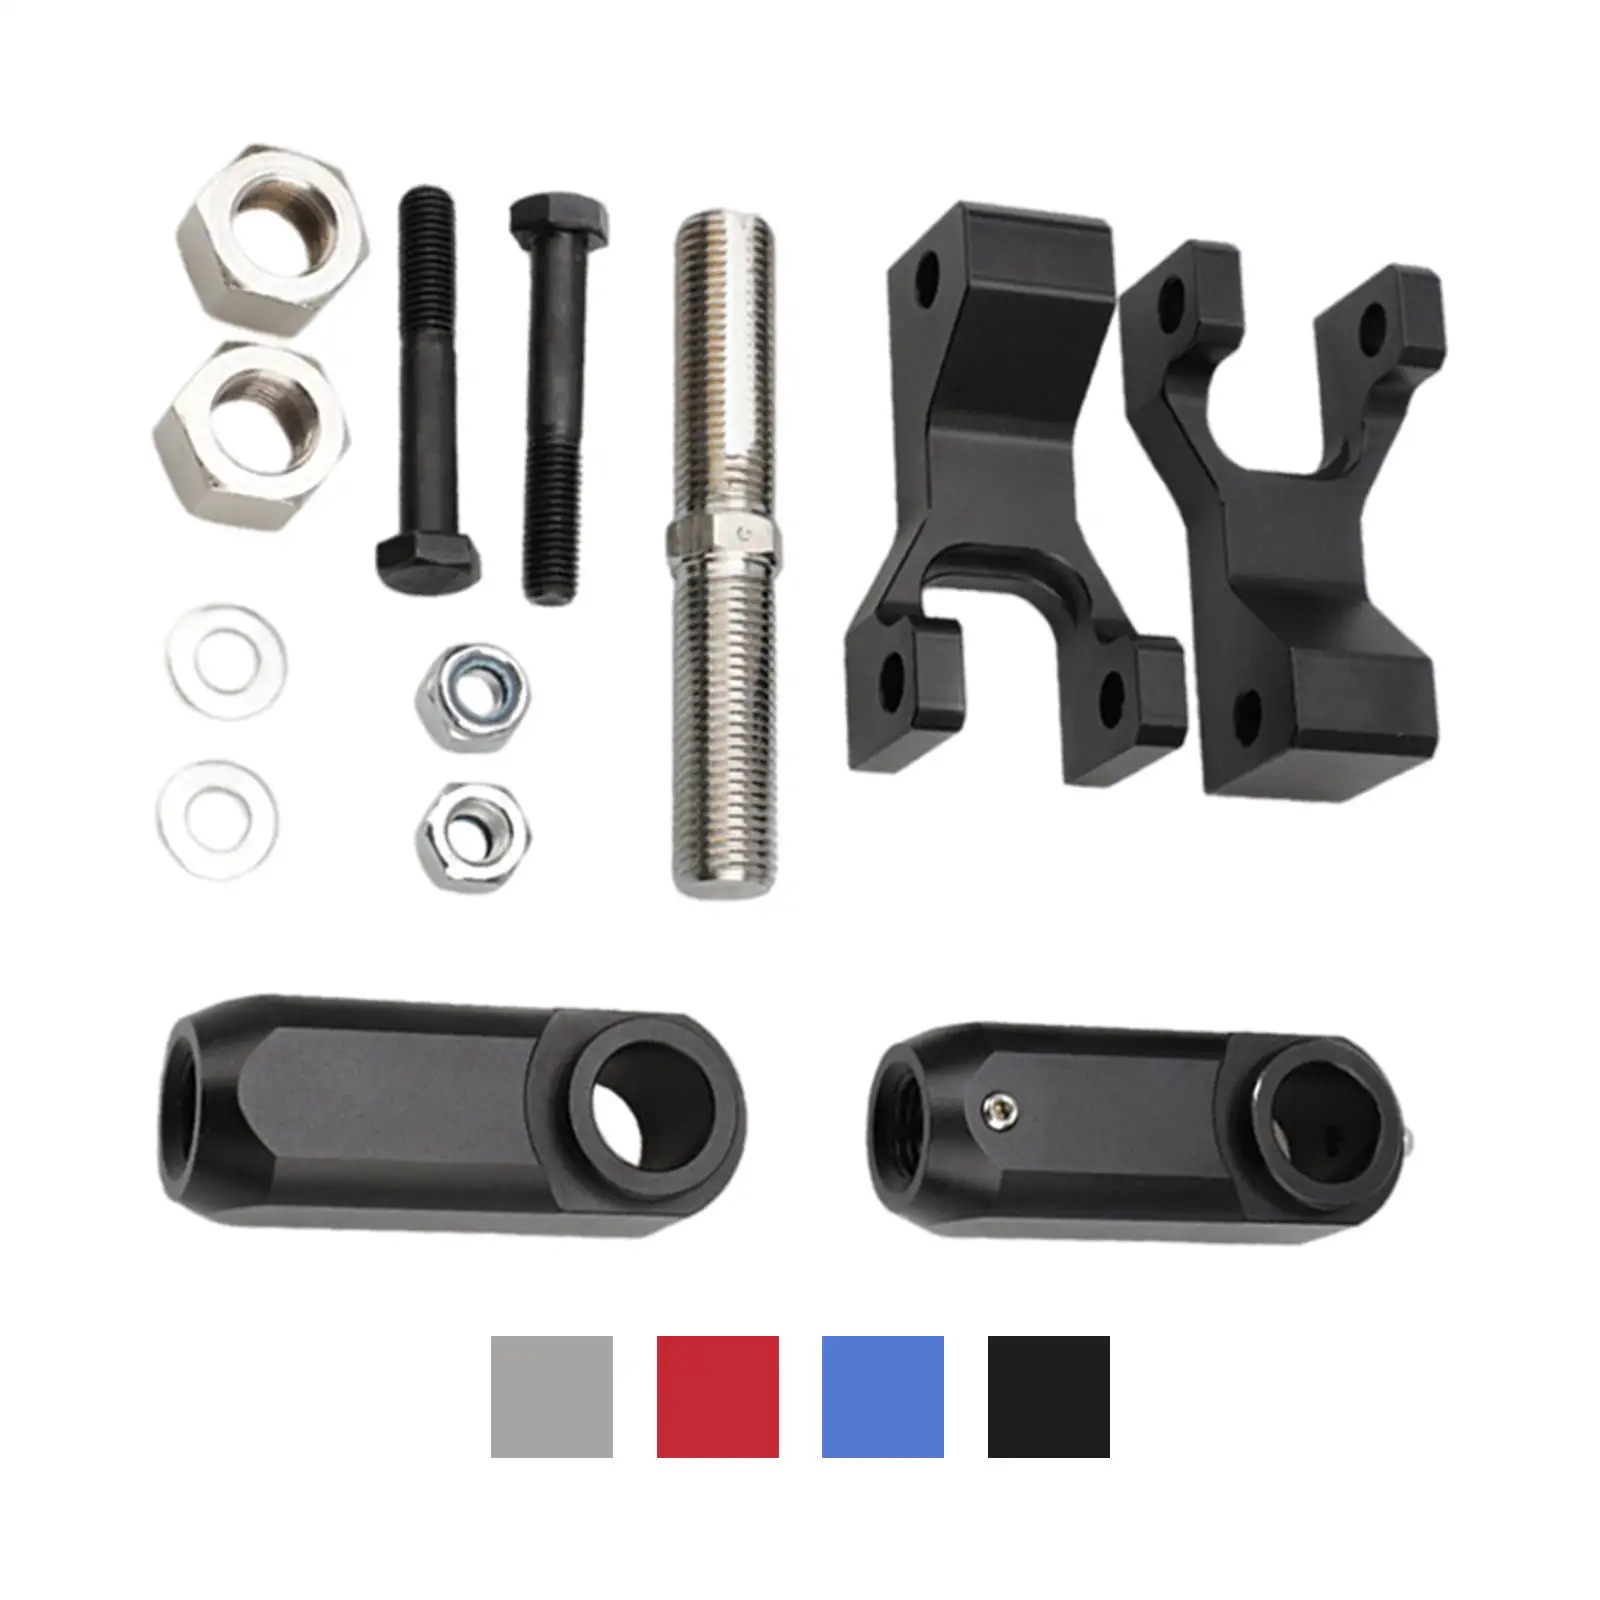 

Front & Rear Billet Lowering Kit for Honda TRX400 TRX50 Replace Parts Accessories Fit for Yamaha 350 660 700